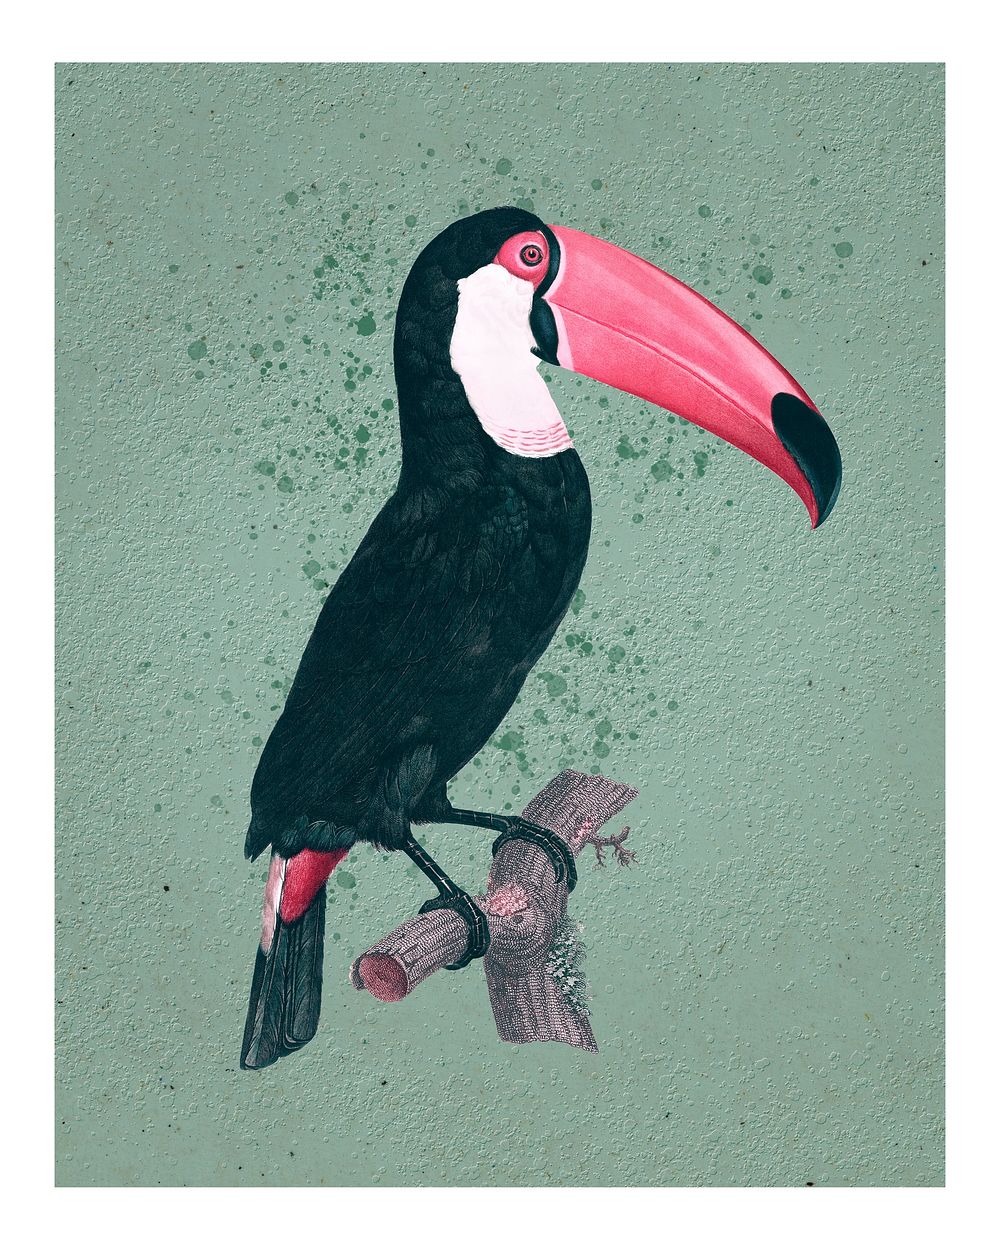 Vintage Toco toucan illustration wall art print and poster design remix from original artwork.